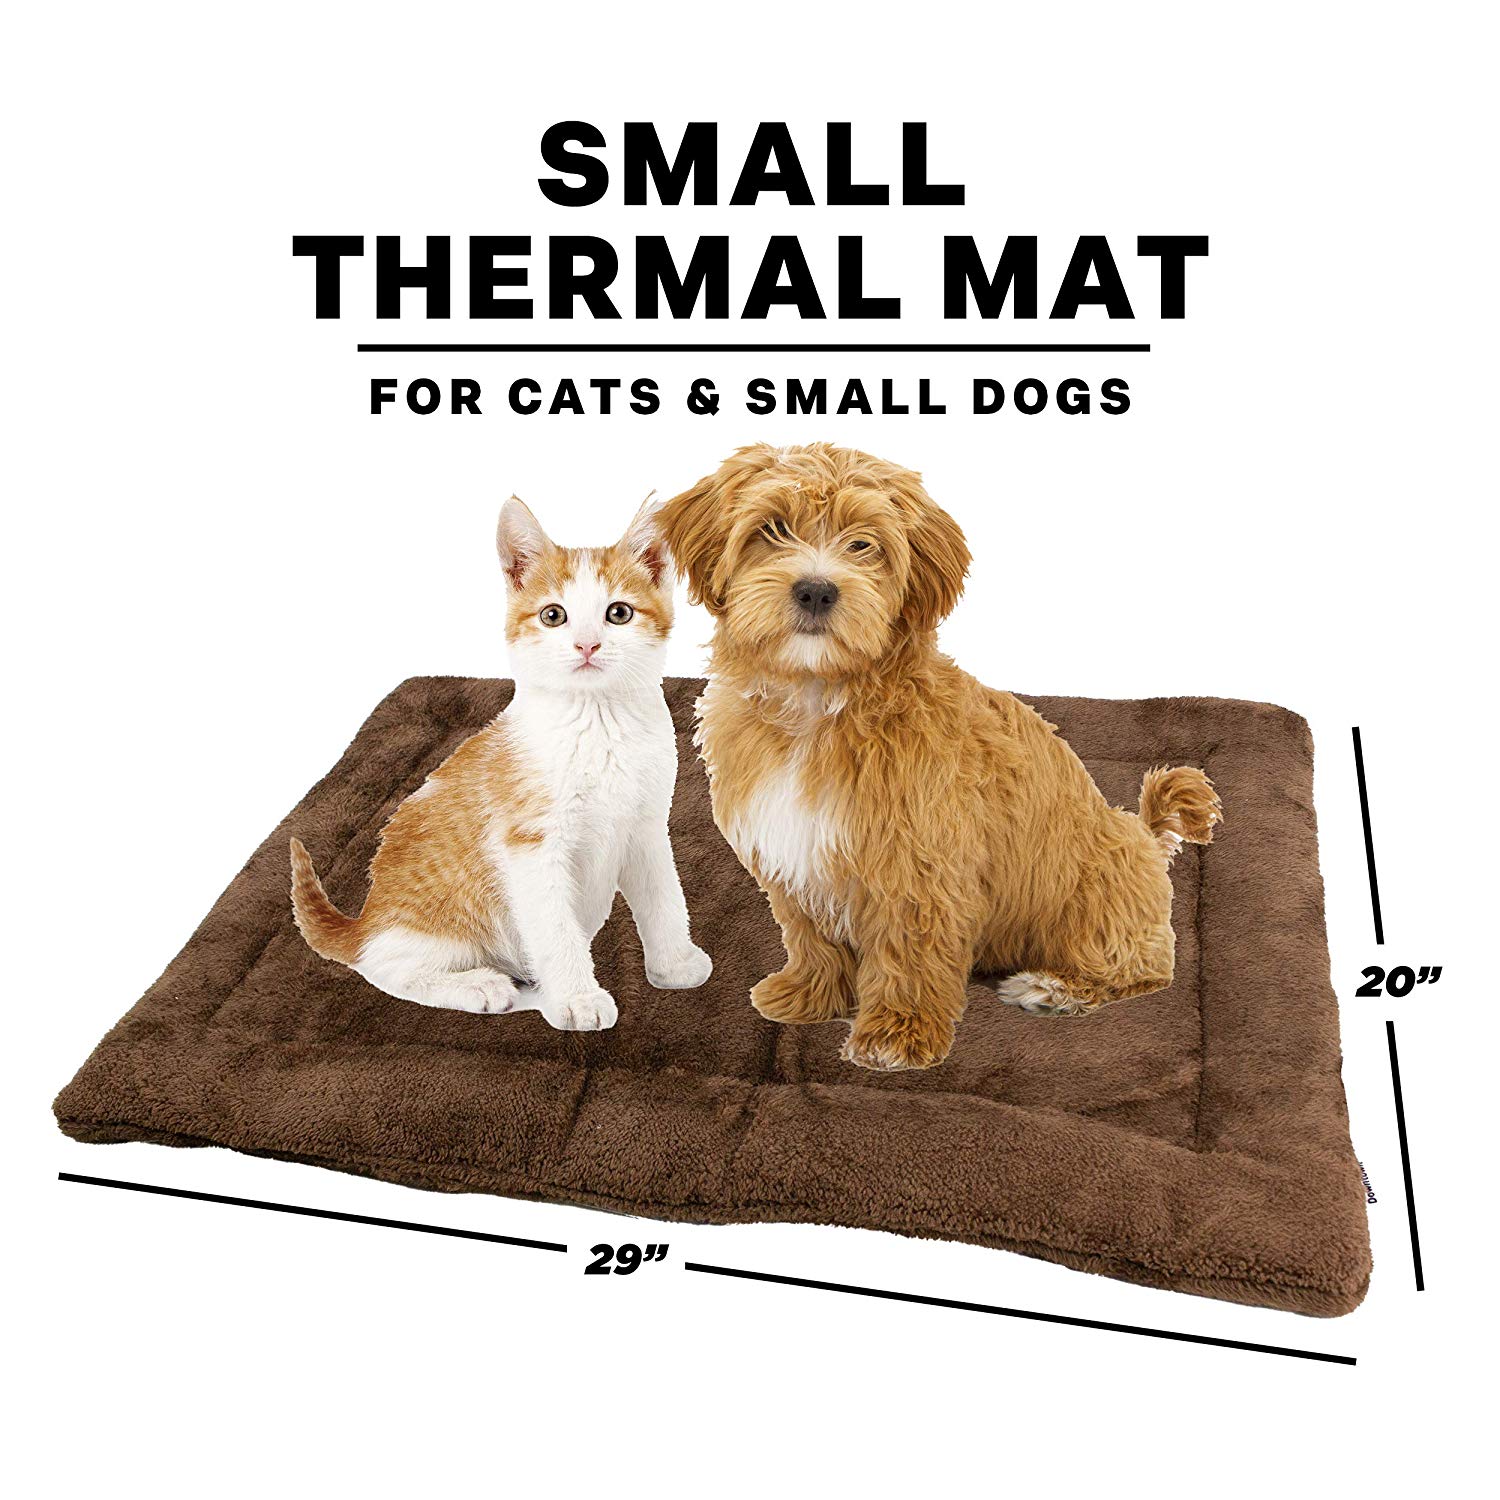 Self-heating Thermal Crate Mats with Handle, Warming Kennel Pads for Dogs, Cats, and Pets (Brown, Small)